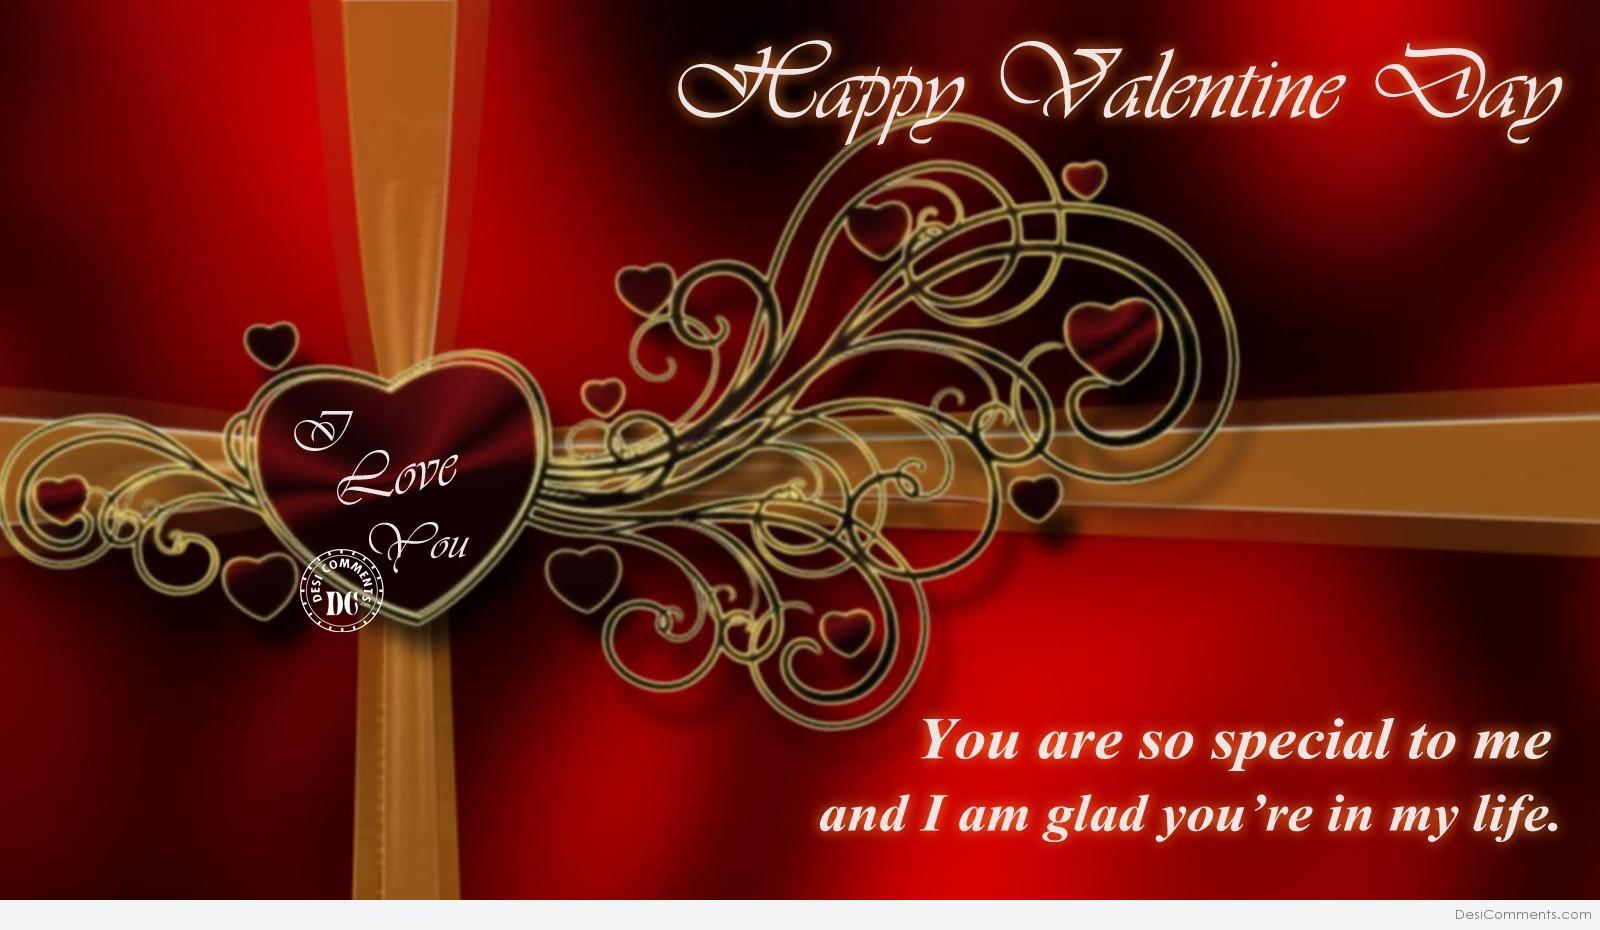 540+ Valentine’s Day Images, Pictures, Photos - Page 7 | Desi Comments